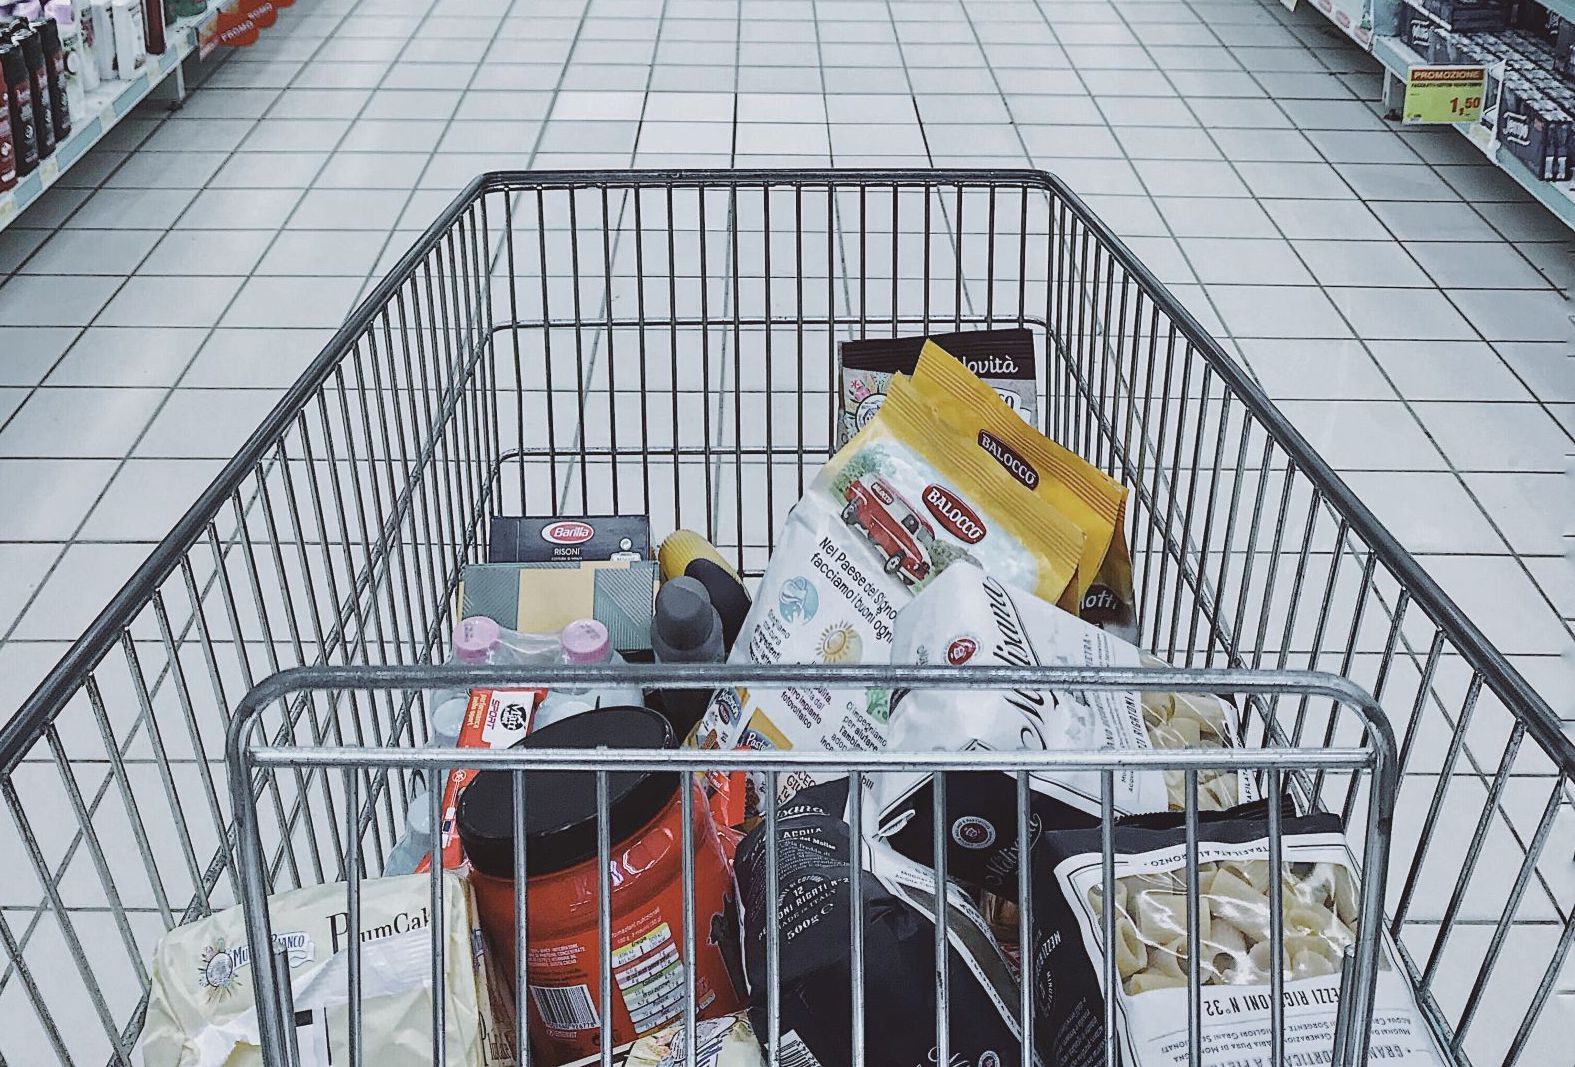 Shopping trolley in aisle